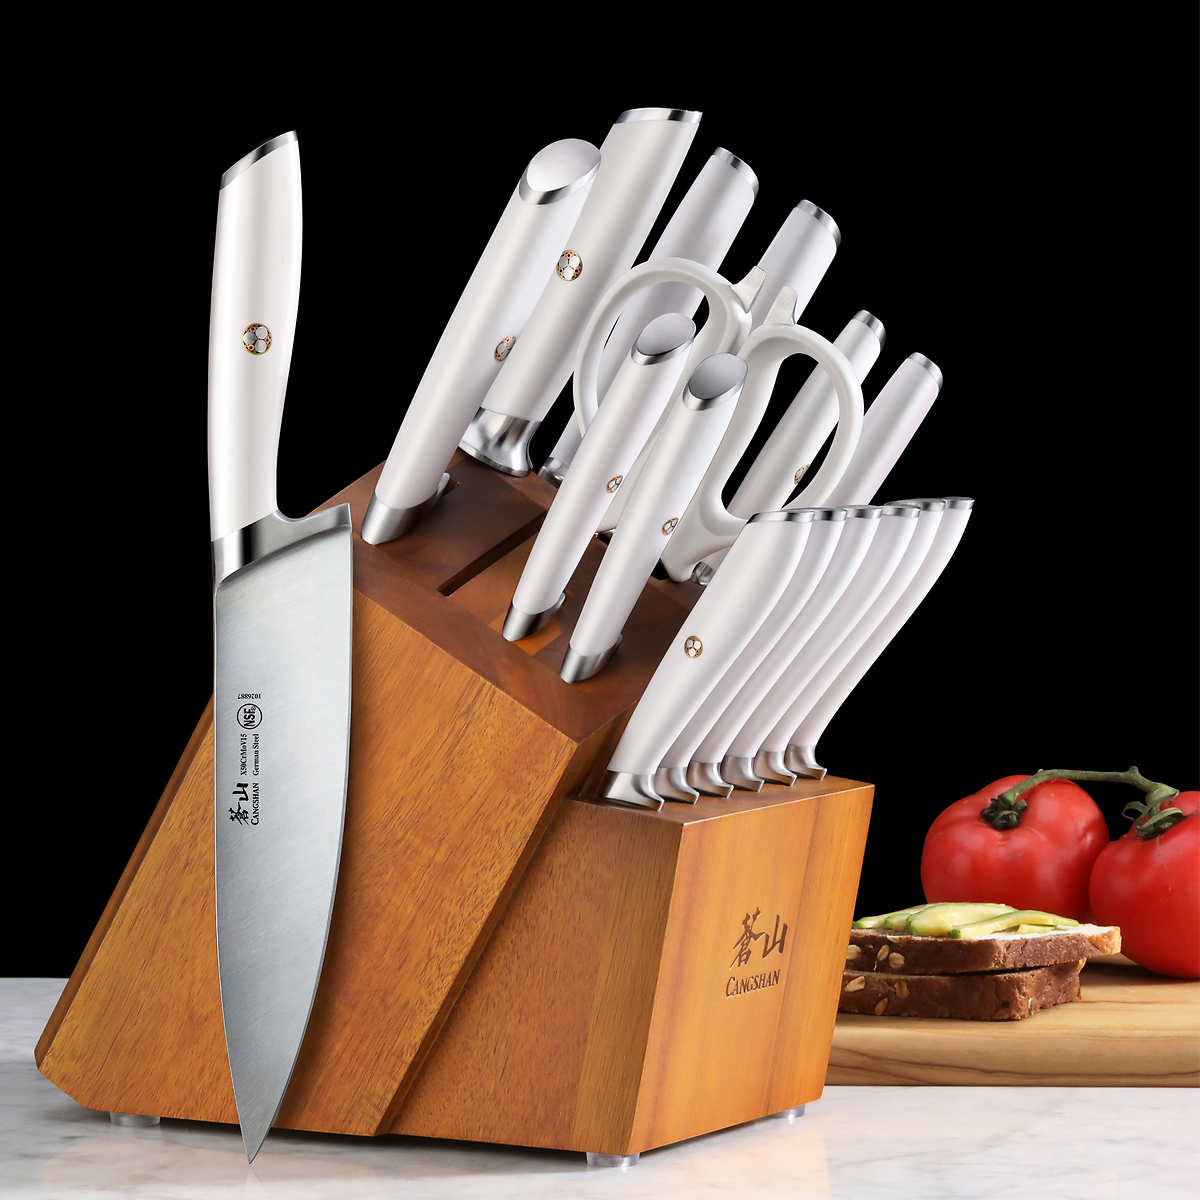 11 Pieces Kitchen Knives for Kids, Plastic Knives for Toddlers for Real Cooking, Safe Knives for Kids